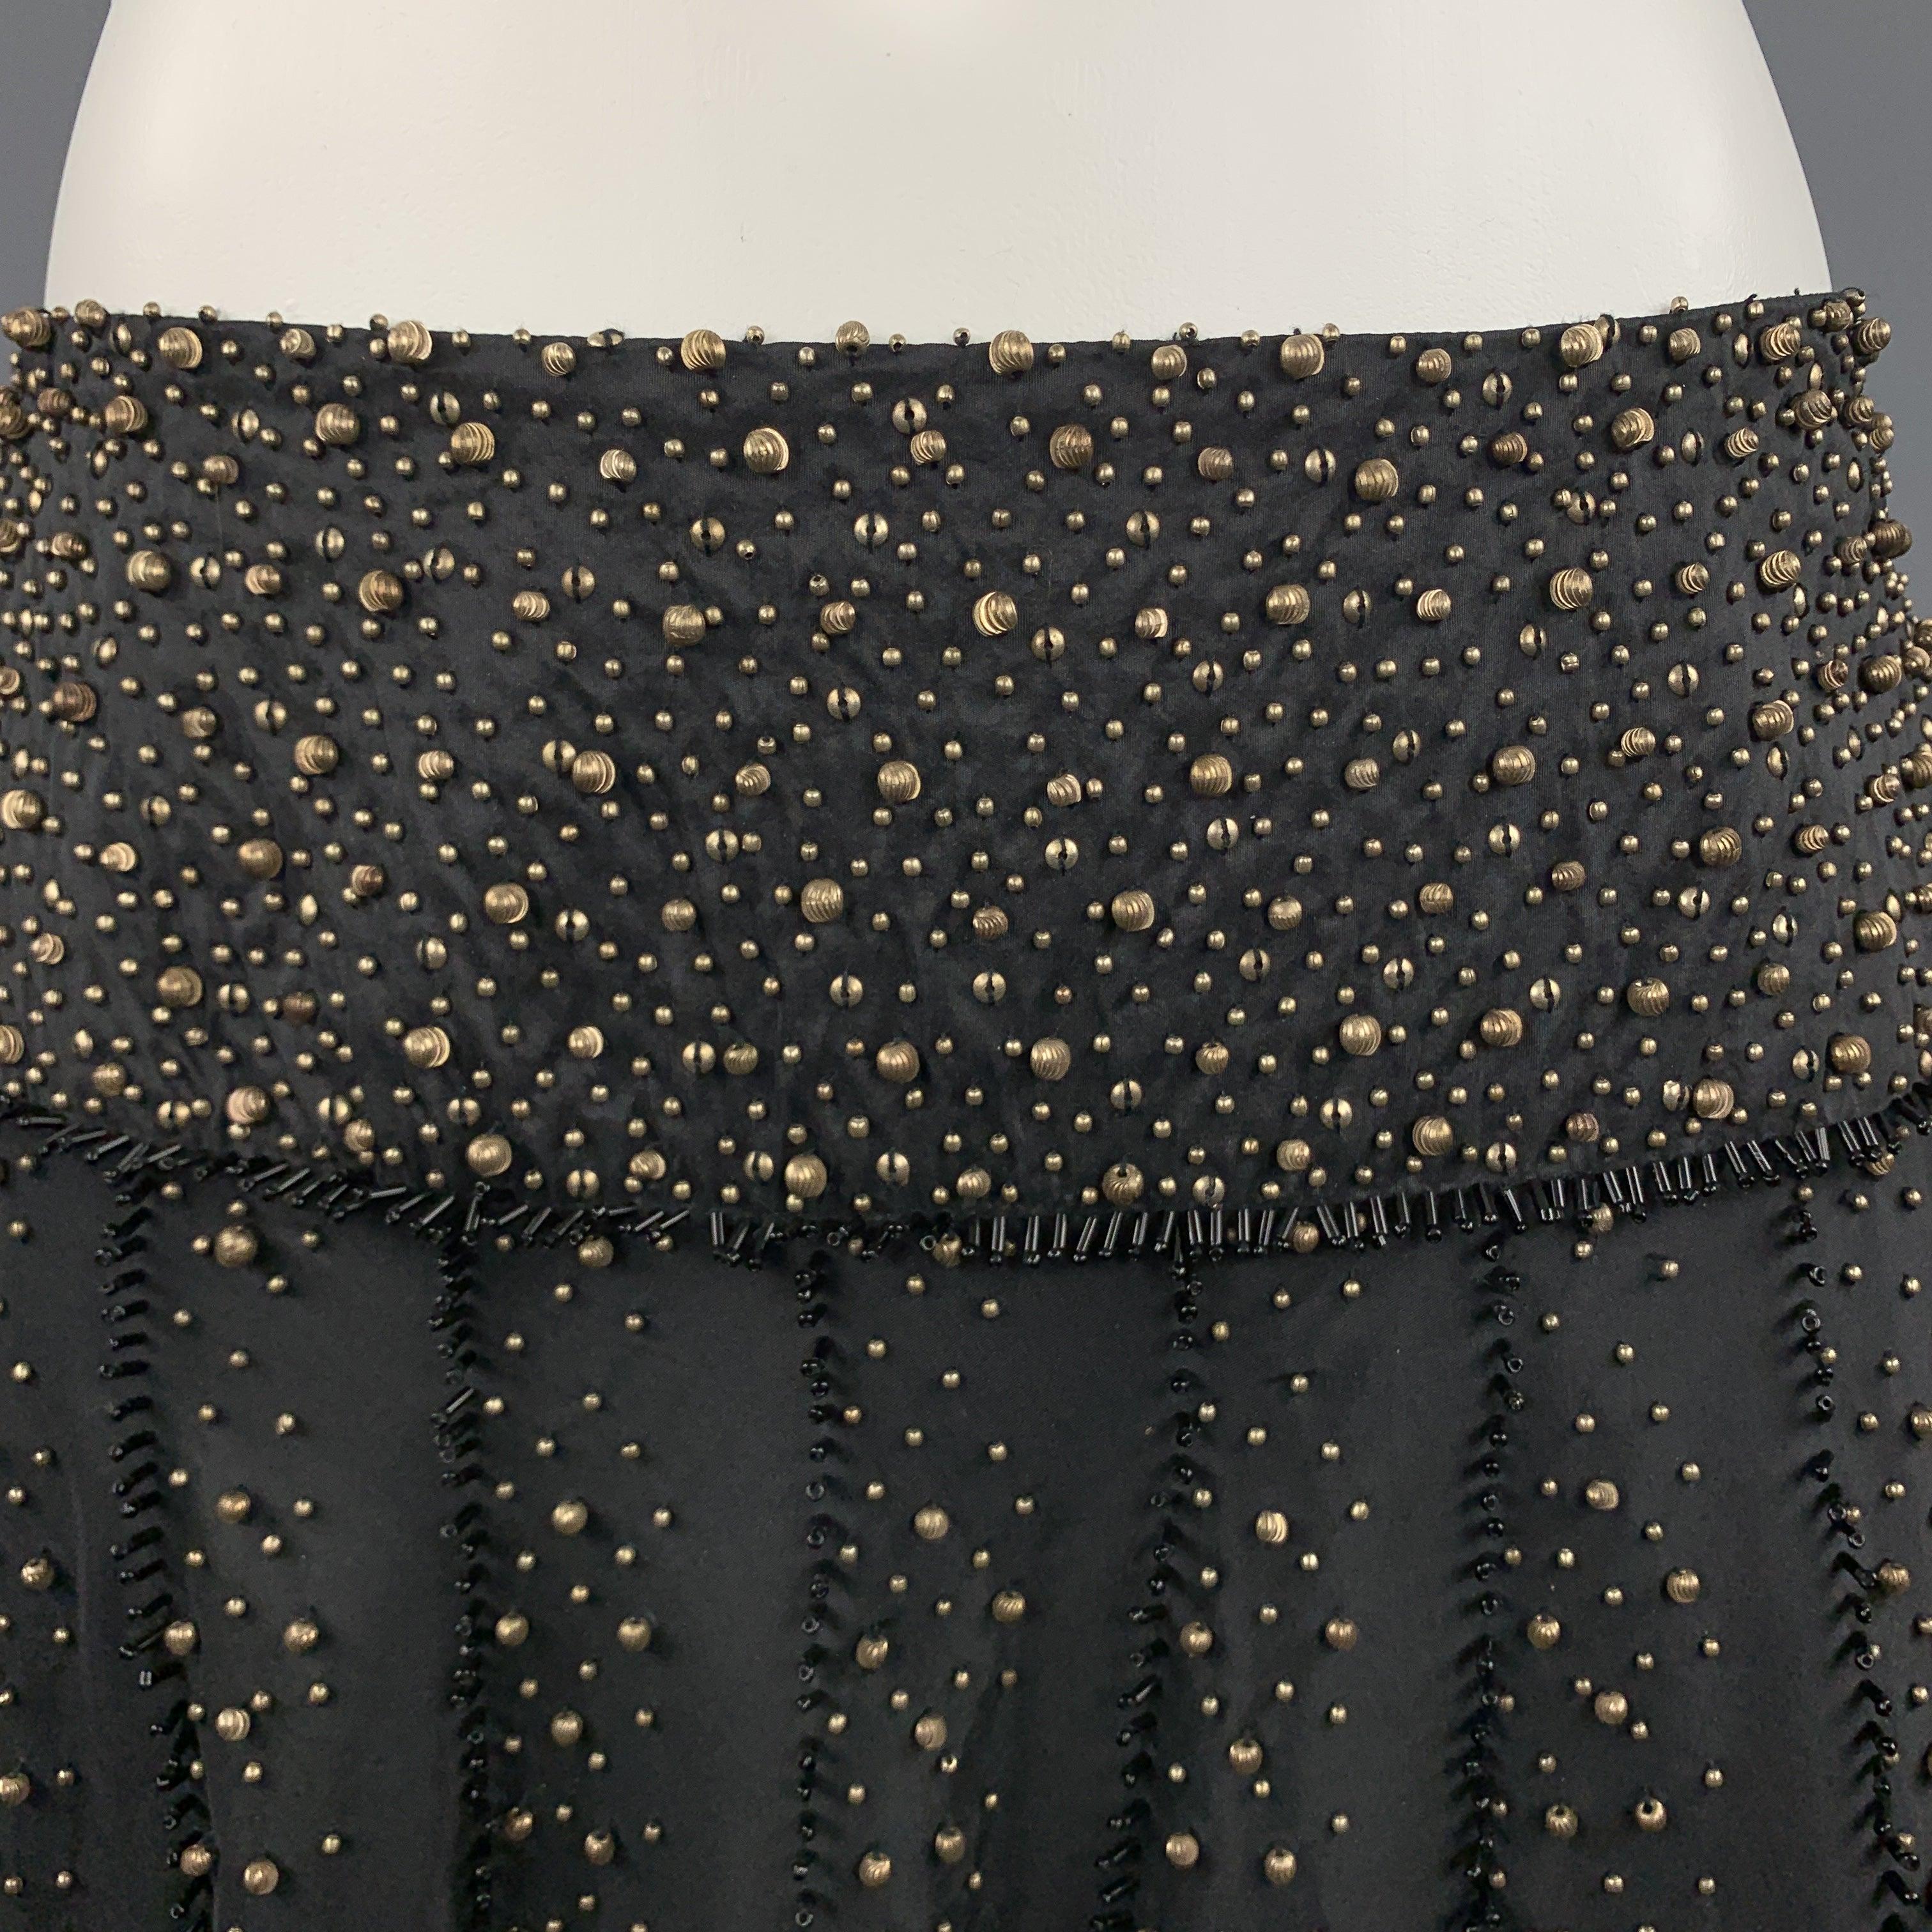 NAEEM KHAN A line skirt comes in black silk taffeta gold tone beadwork throughout and black bugle bead piping. Made in USA.Excellent
Pre-Owned Condition. 

Marked:   US 6 

Measurements: 
  Waist:
29 inches Hip: 60 inches Length: 25 inches 
  
  
